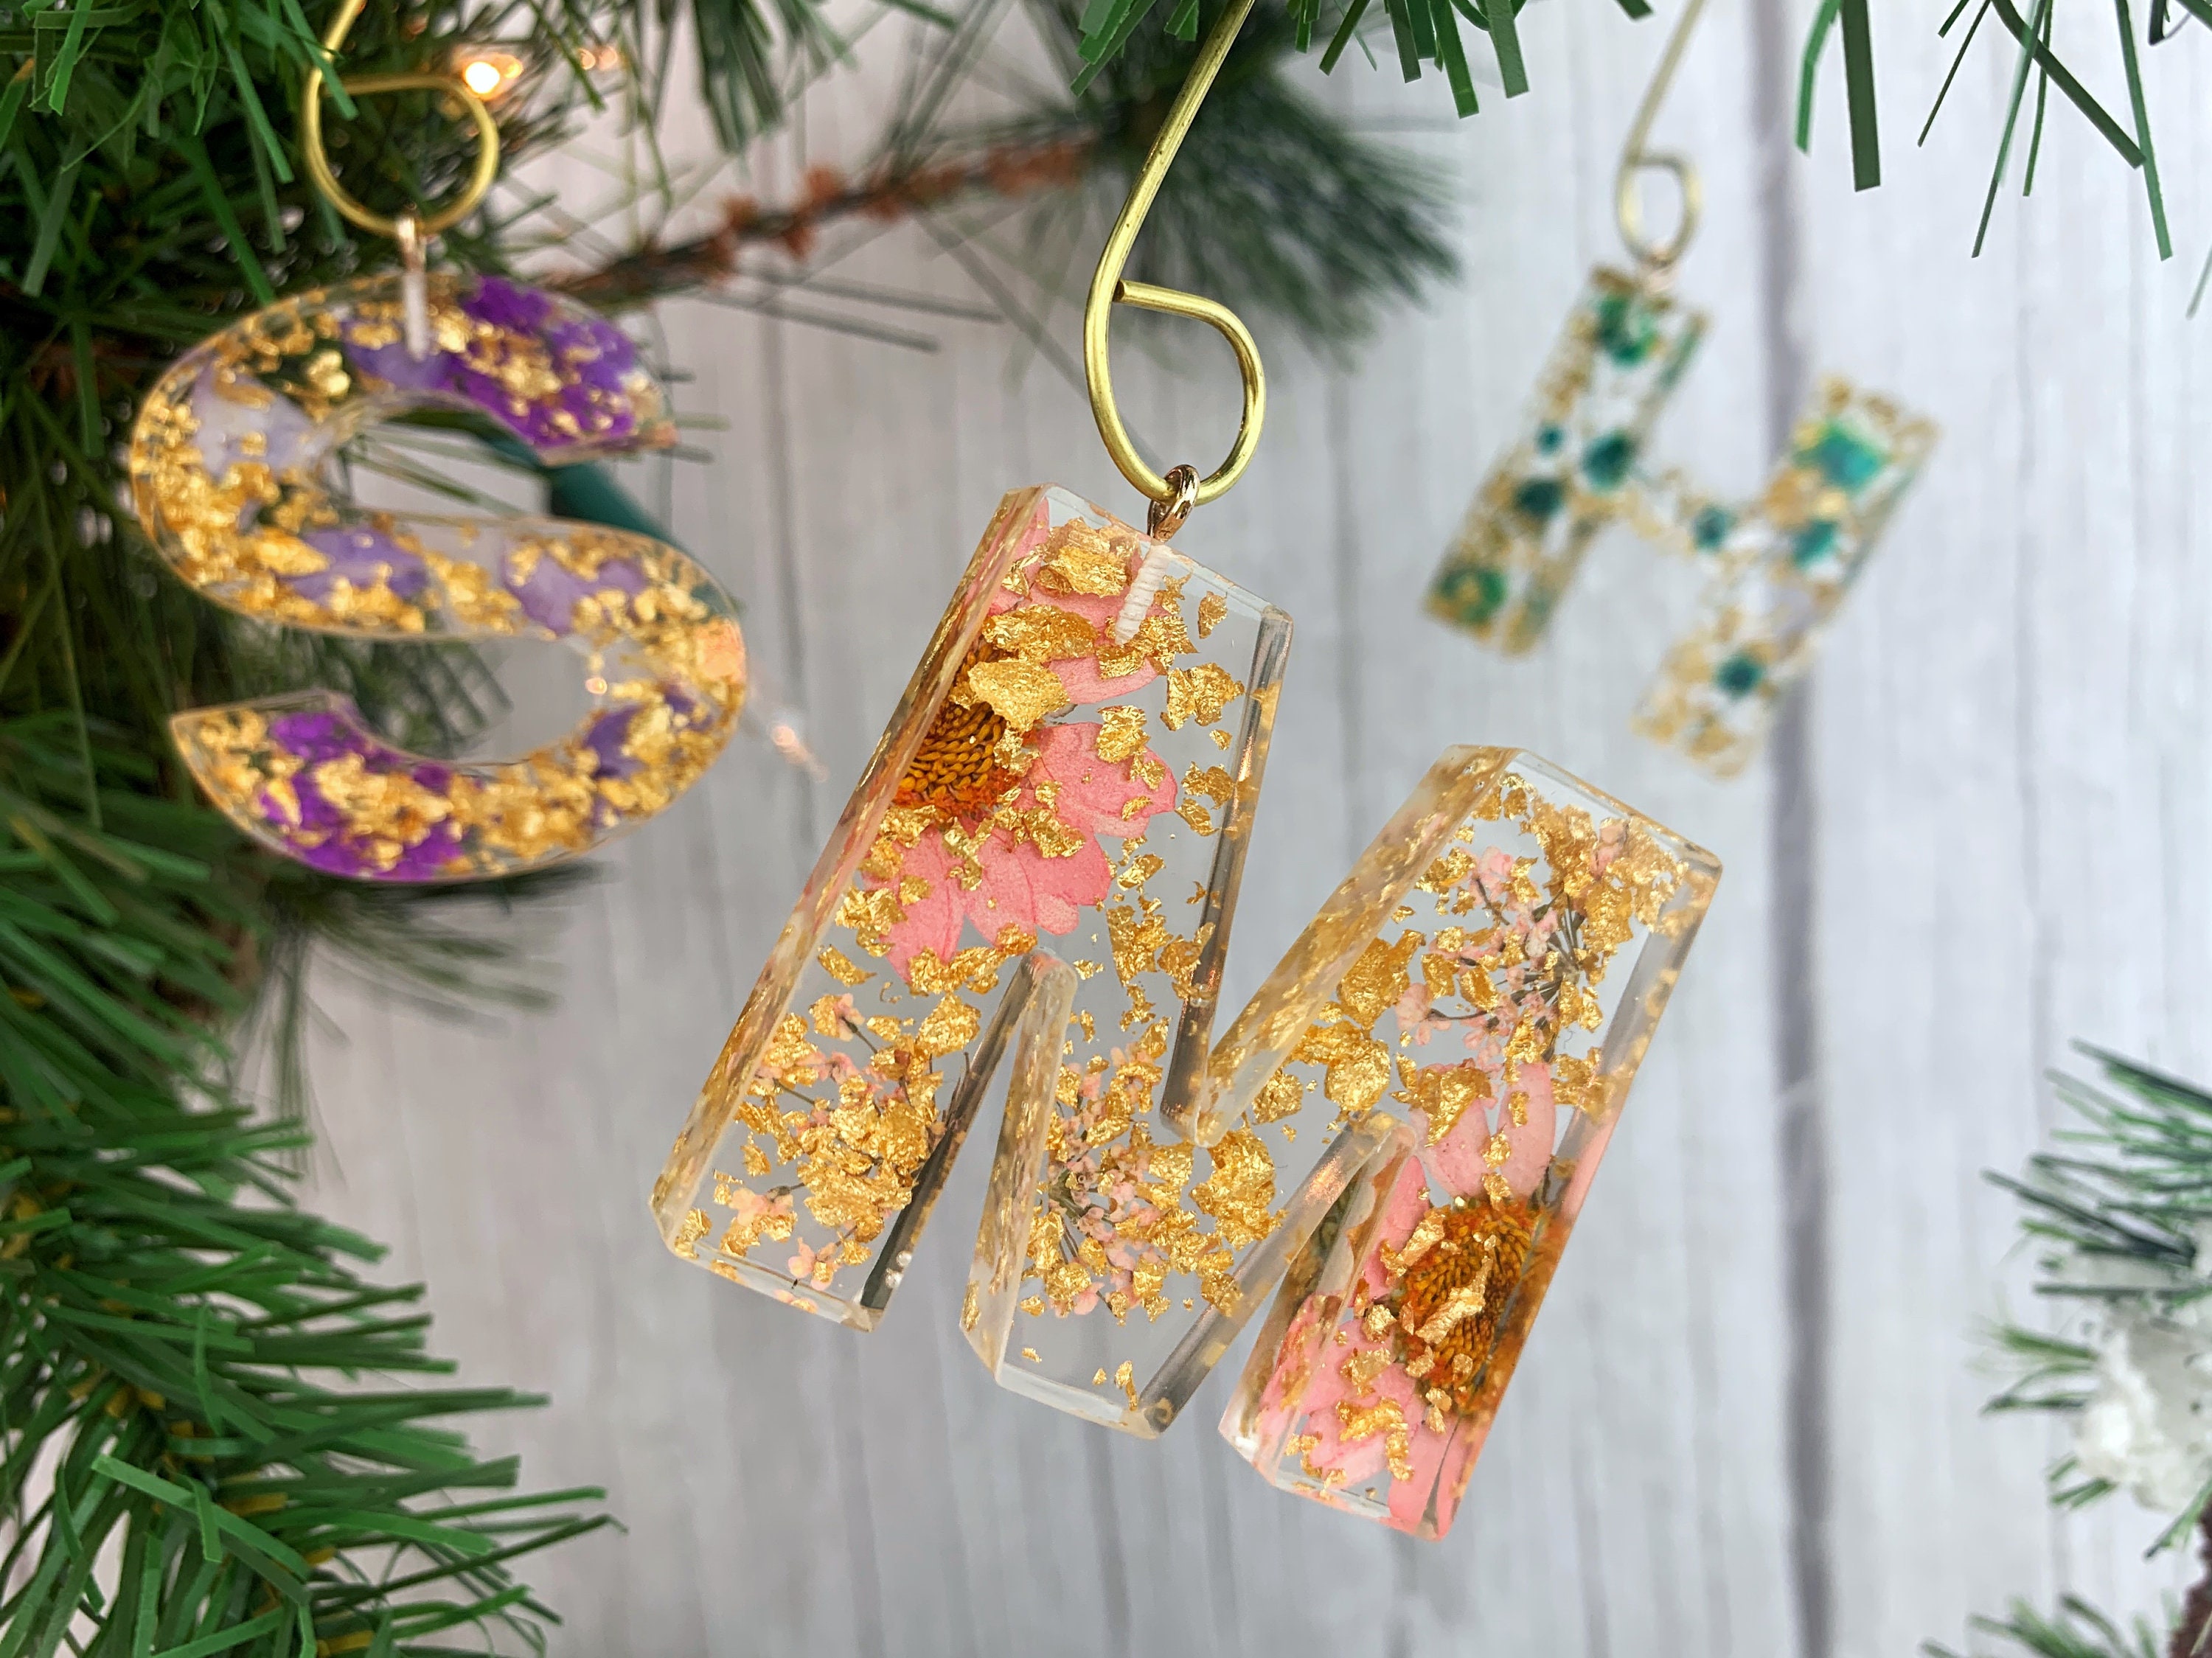 Finelylove Lighted Christmas Decorations Christmas Ornaments Resin